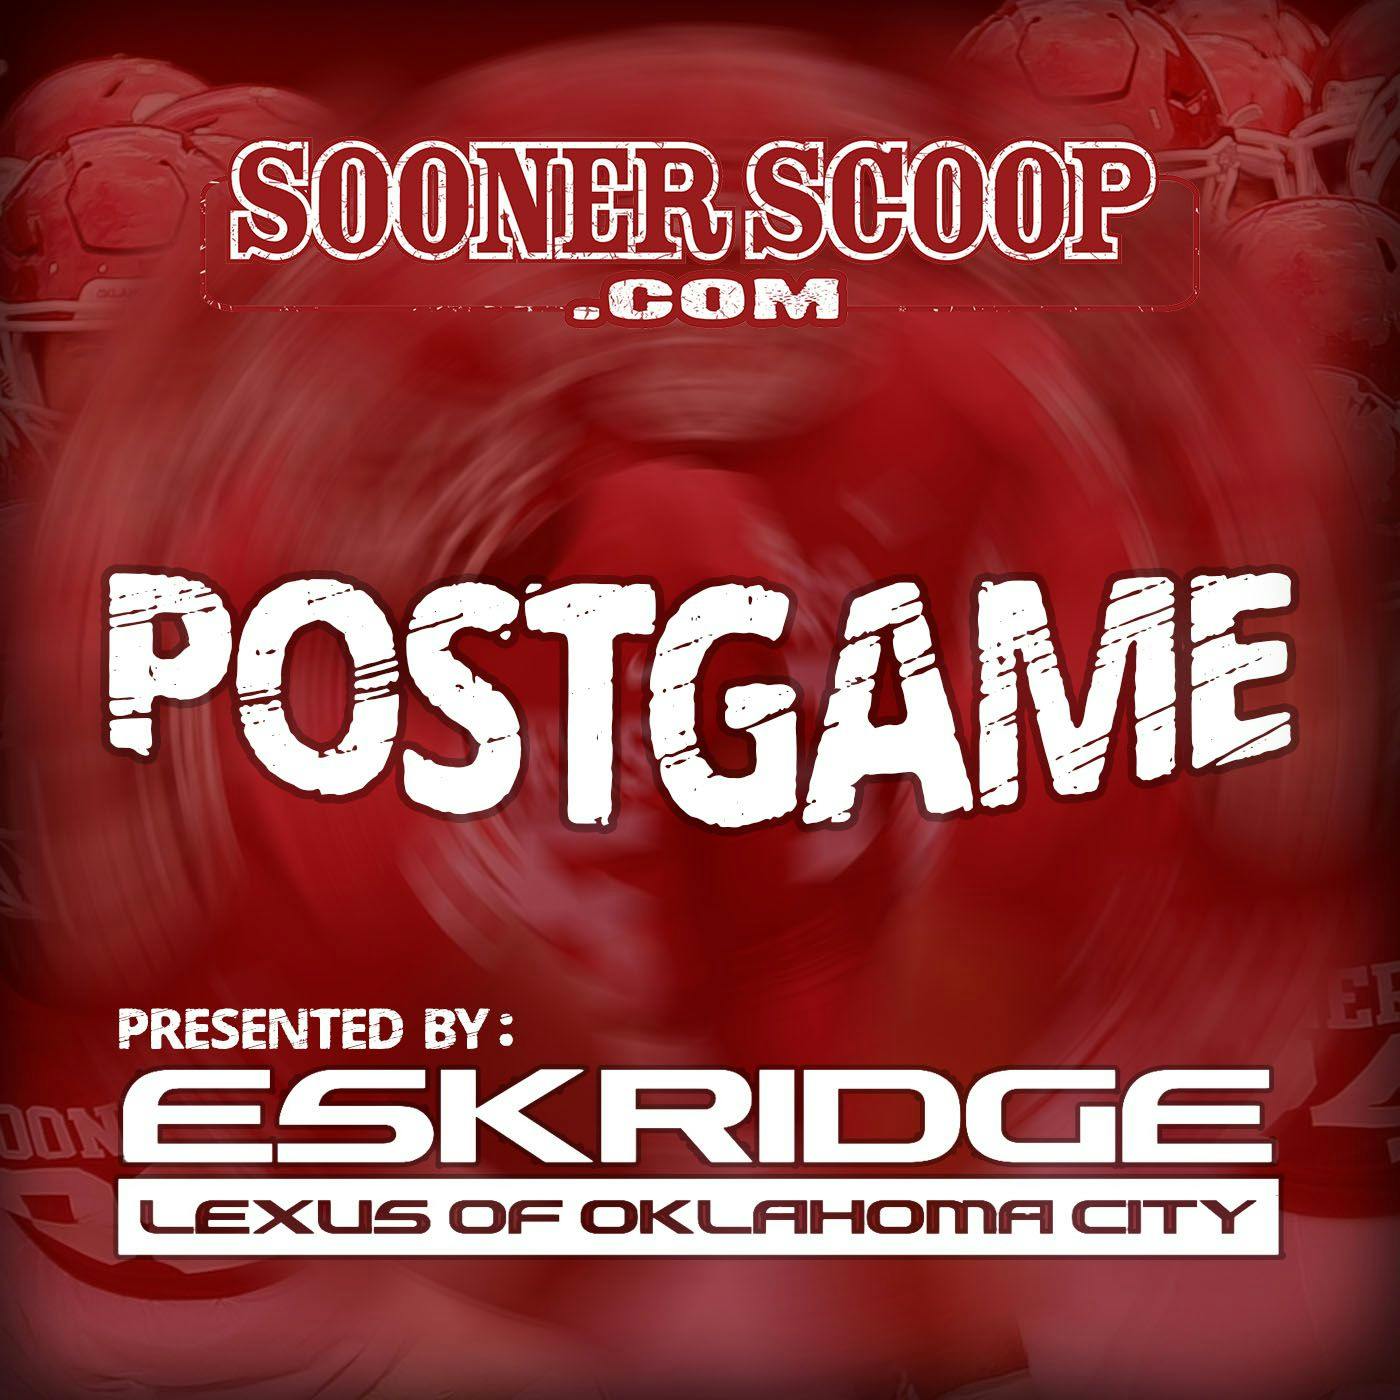 POSTGAME: A win like everyone needed against Texas Tech